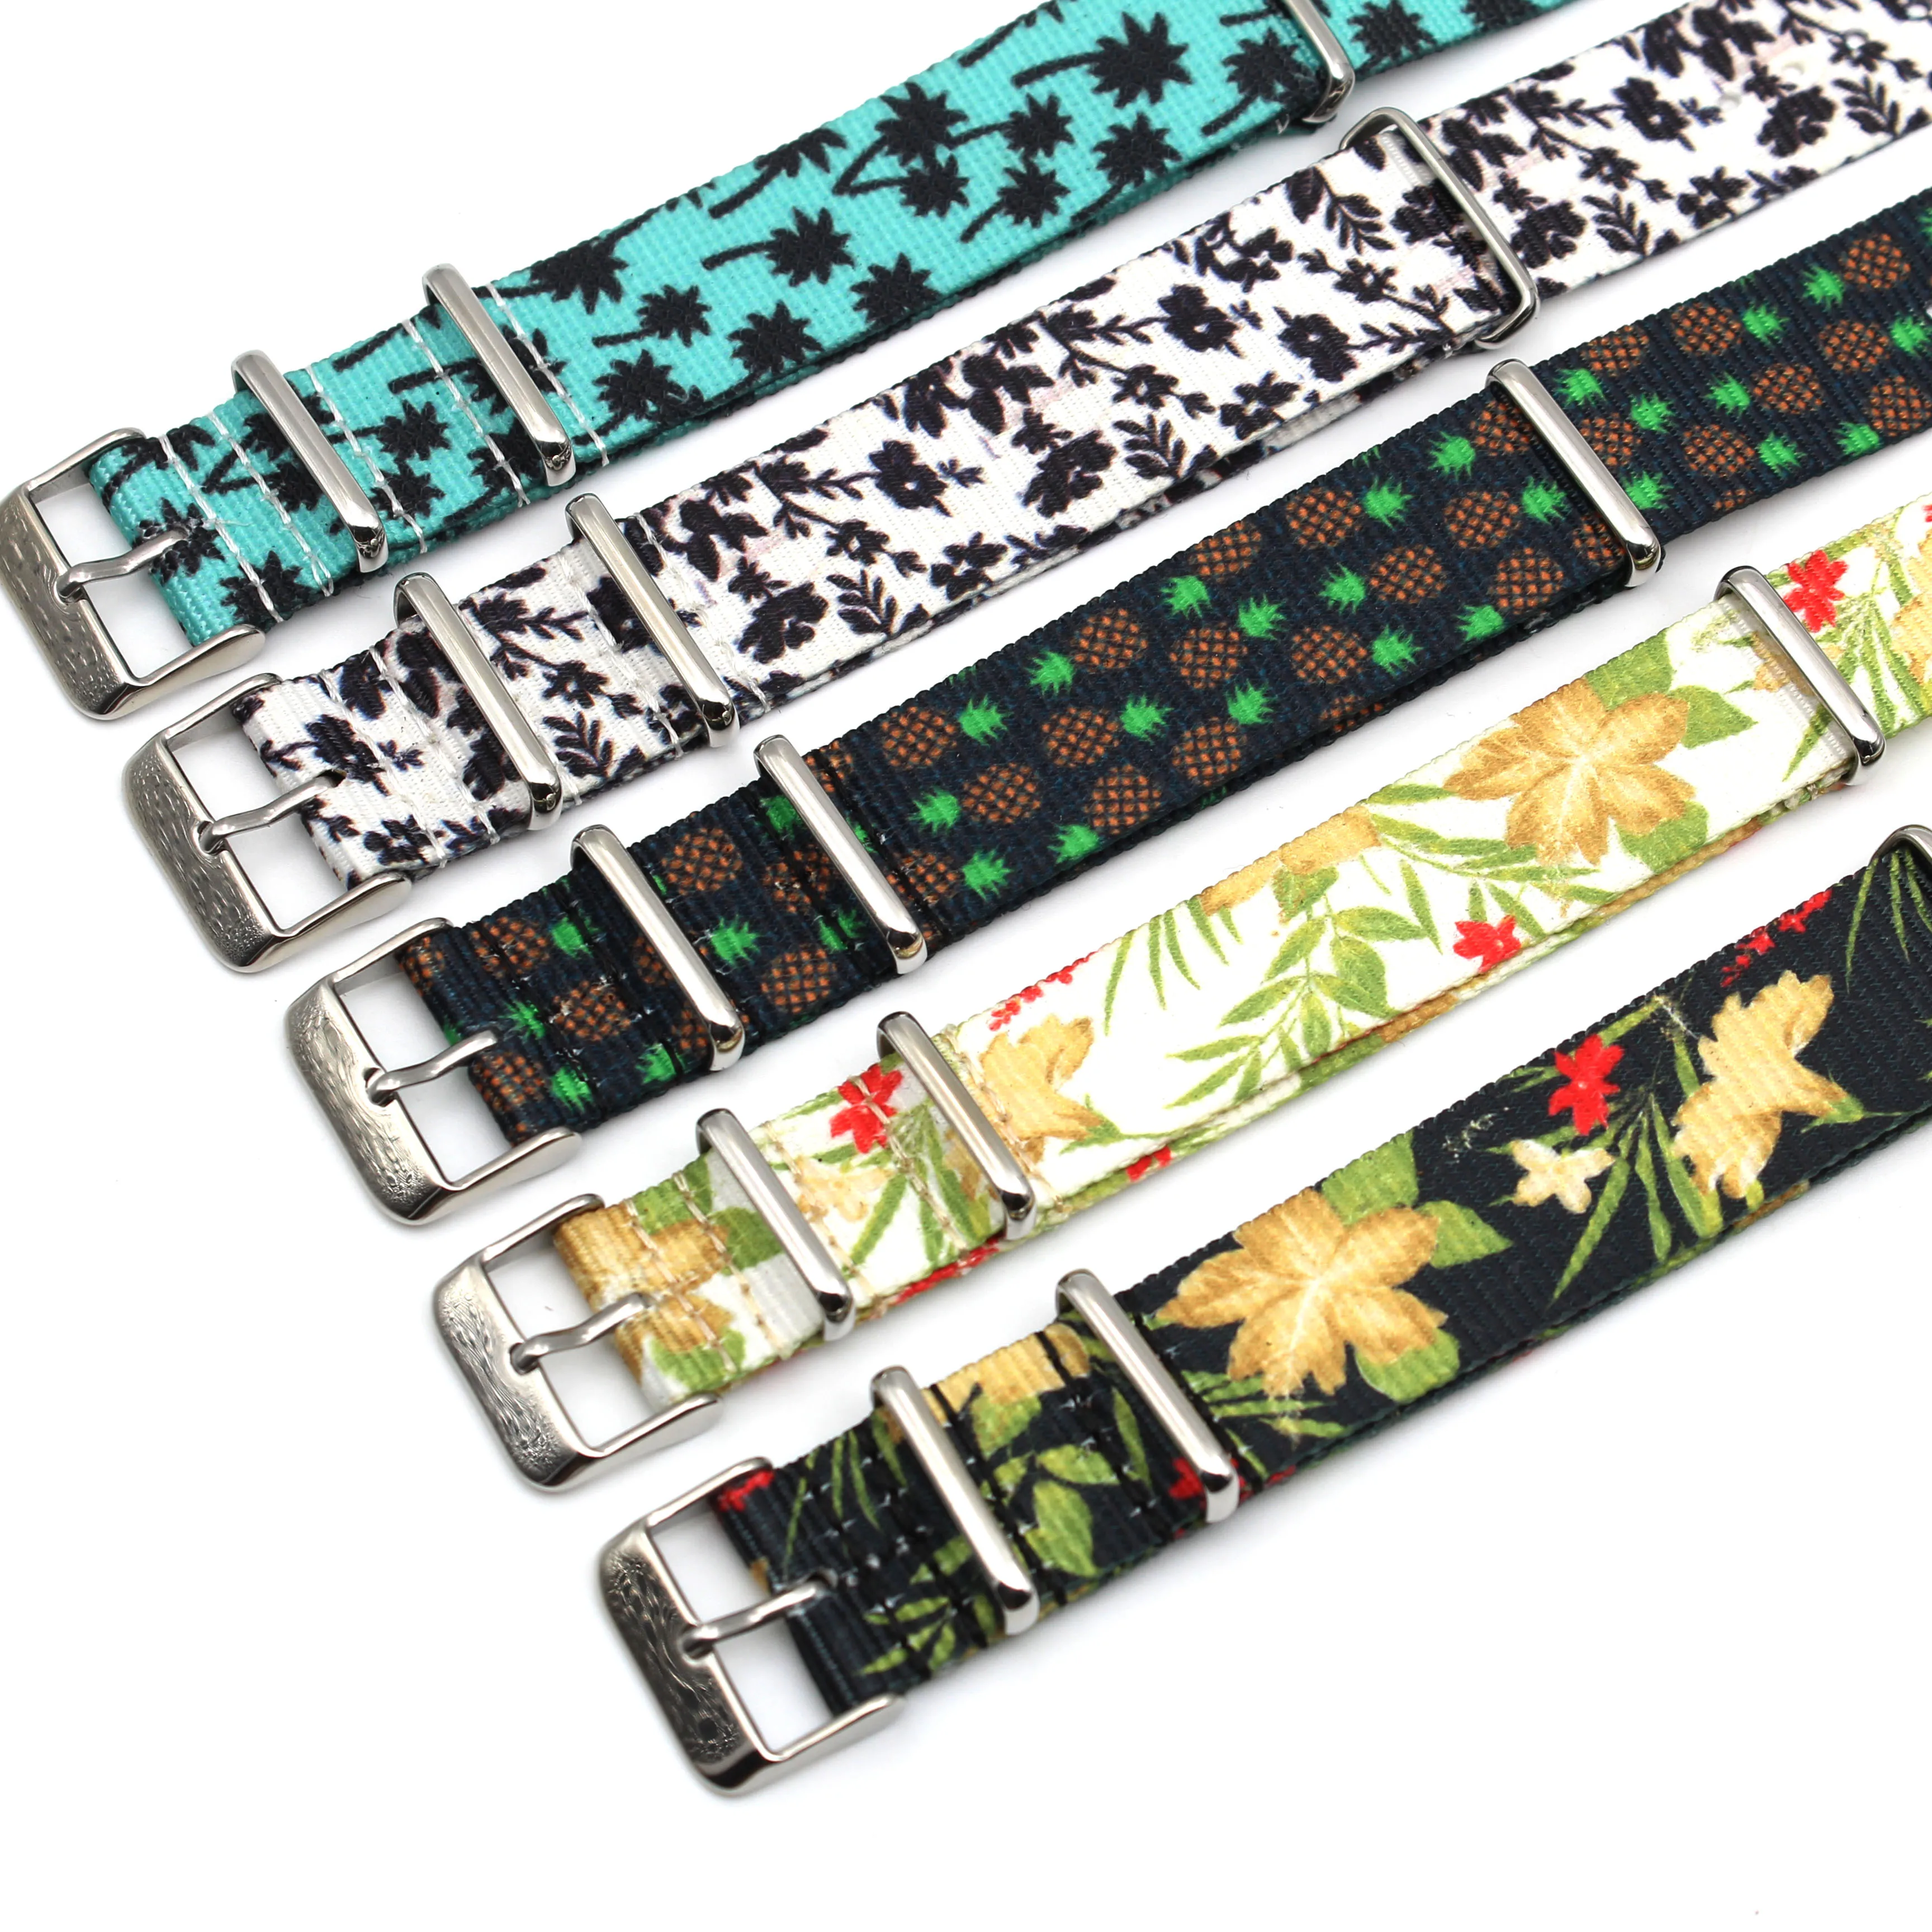 

Factory Direct Fabric Printed Watch Straps Nato Watch Bands Eco-Friendly 20mm Nylon Bands For All Watches Amazon Hotseller